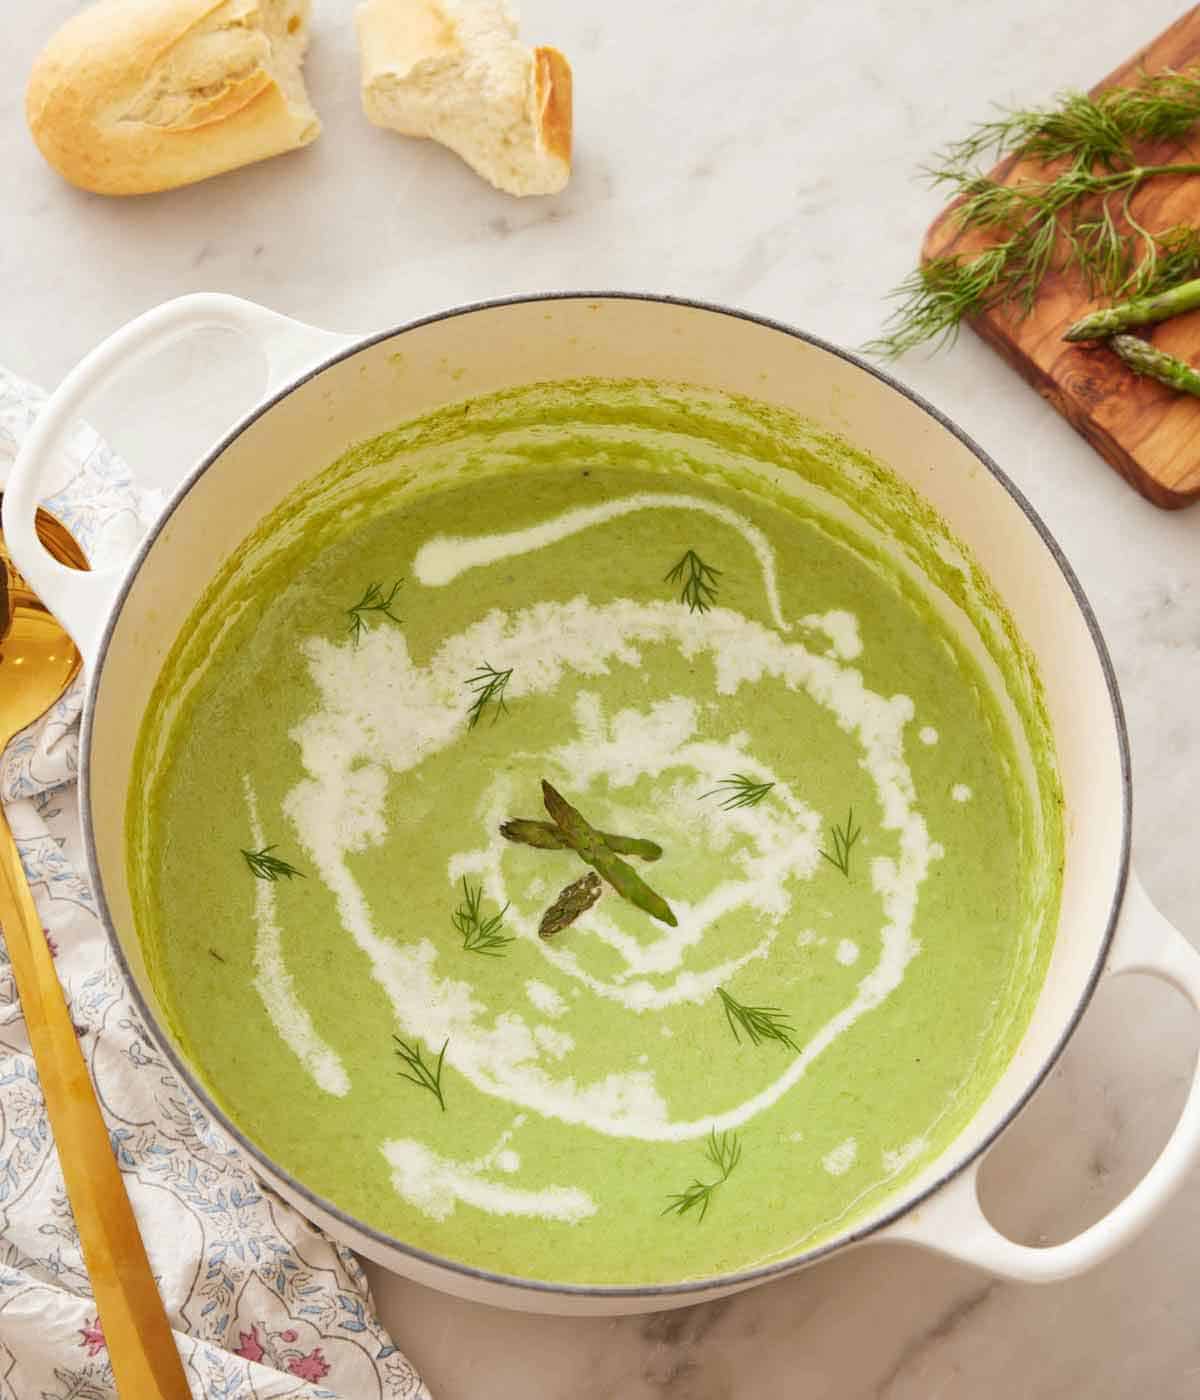 Overhead view of a pot of asparagus soup with some fresh dill and asparagus as garnish and a drizzle of cream.